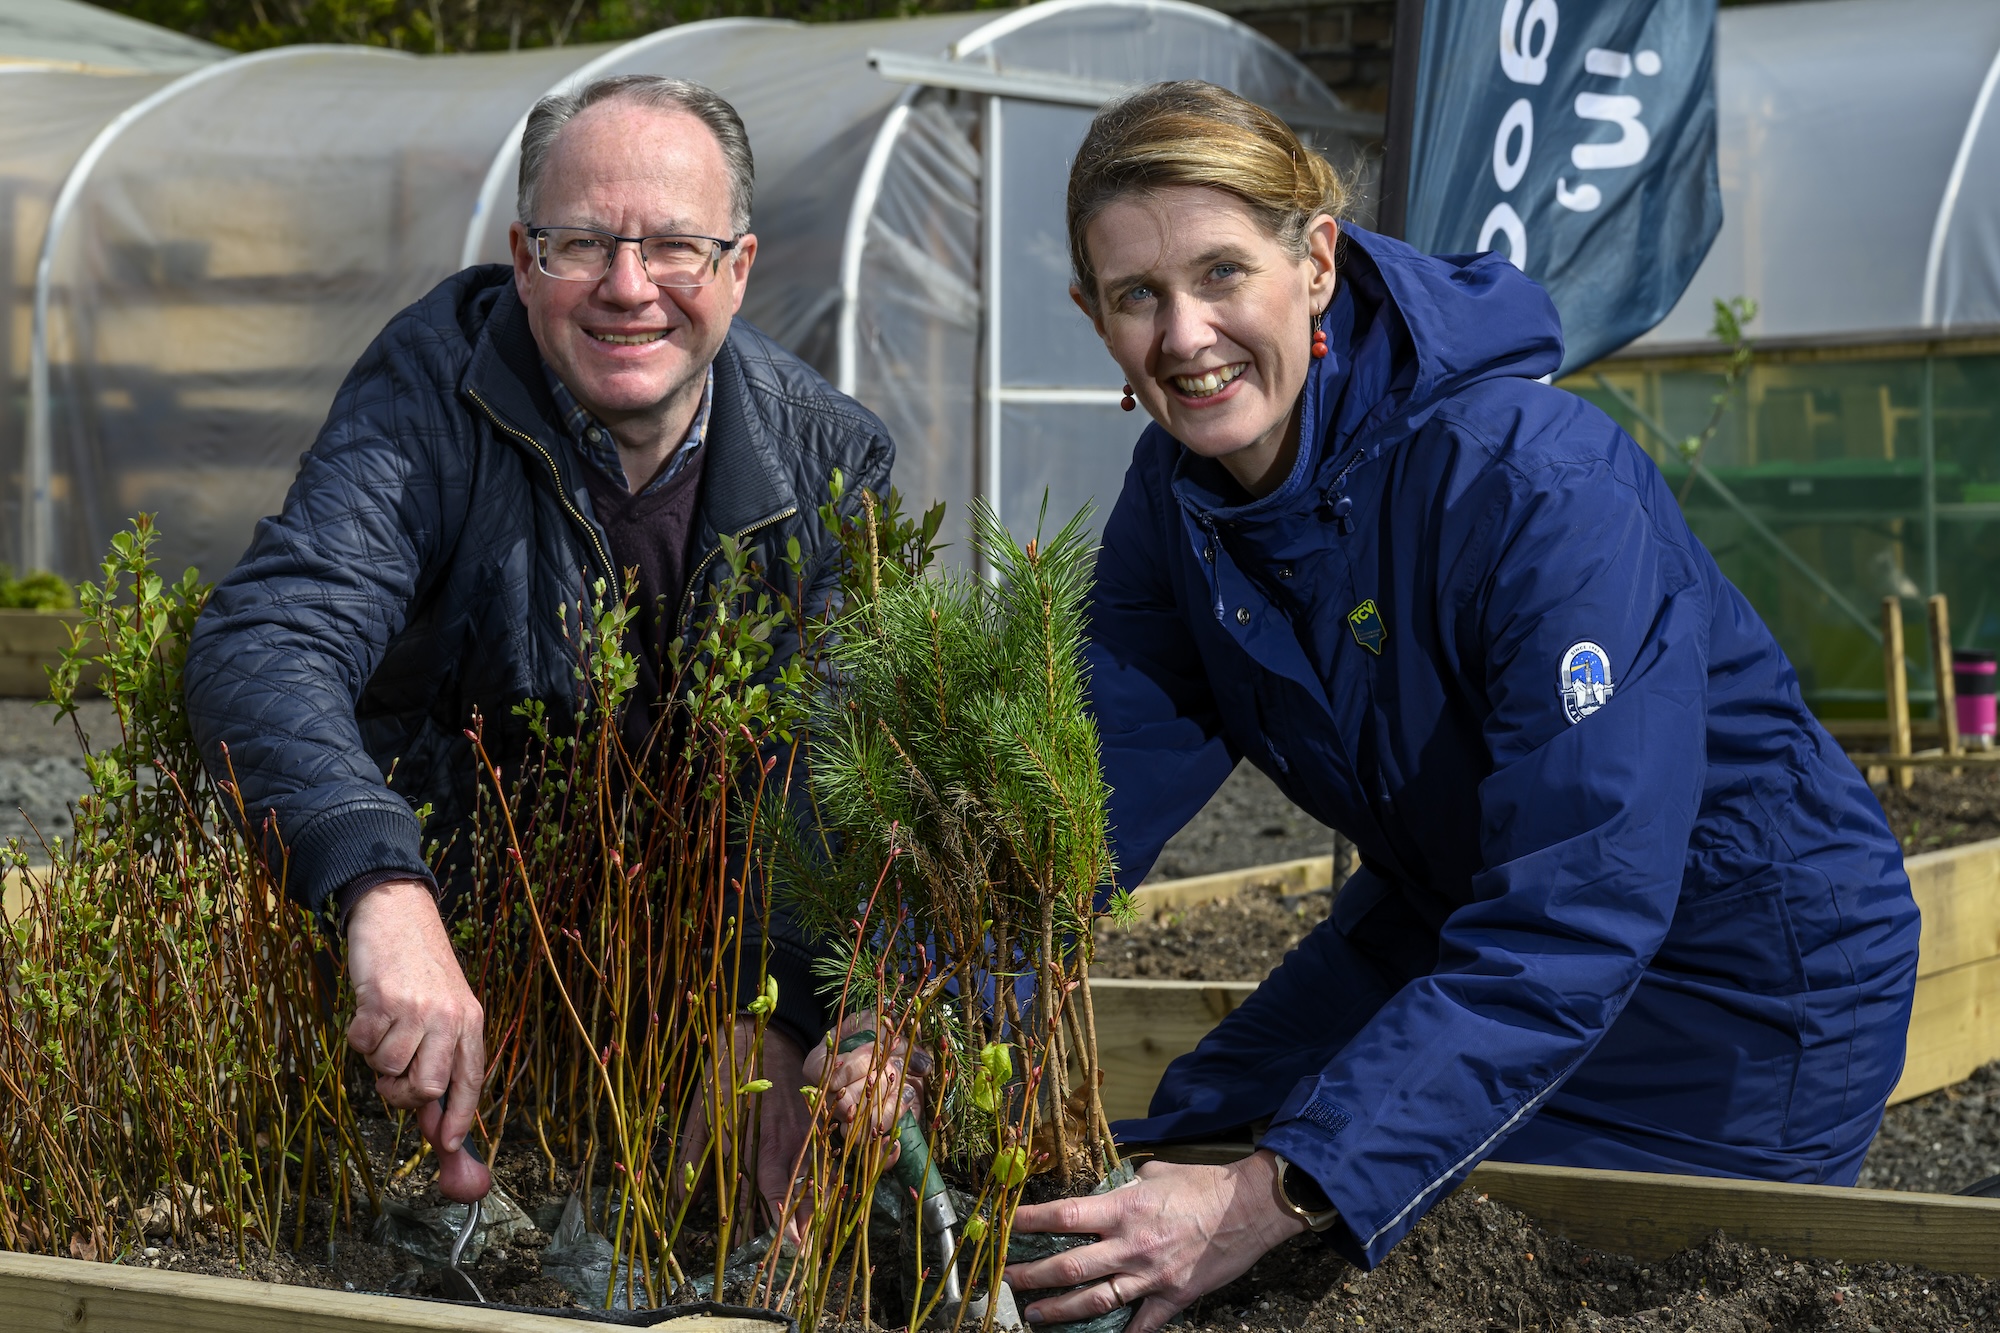 Royal Bank of Scotland partners with The Conservation Volunteers to nurture Scotland's green spaces